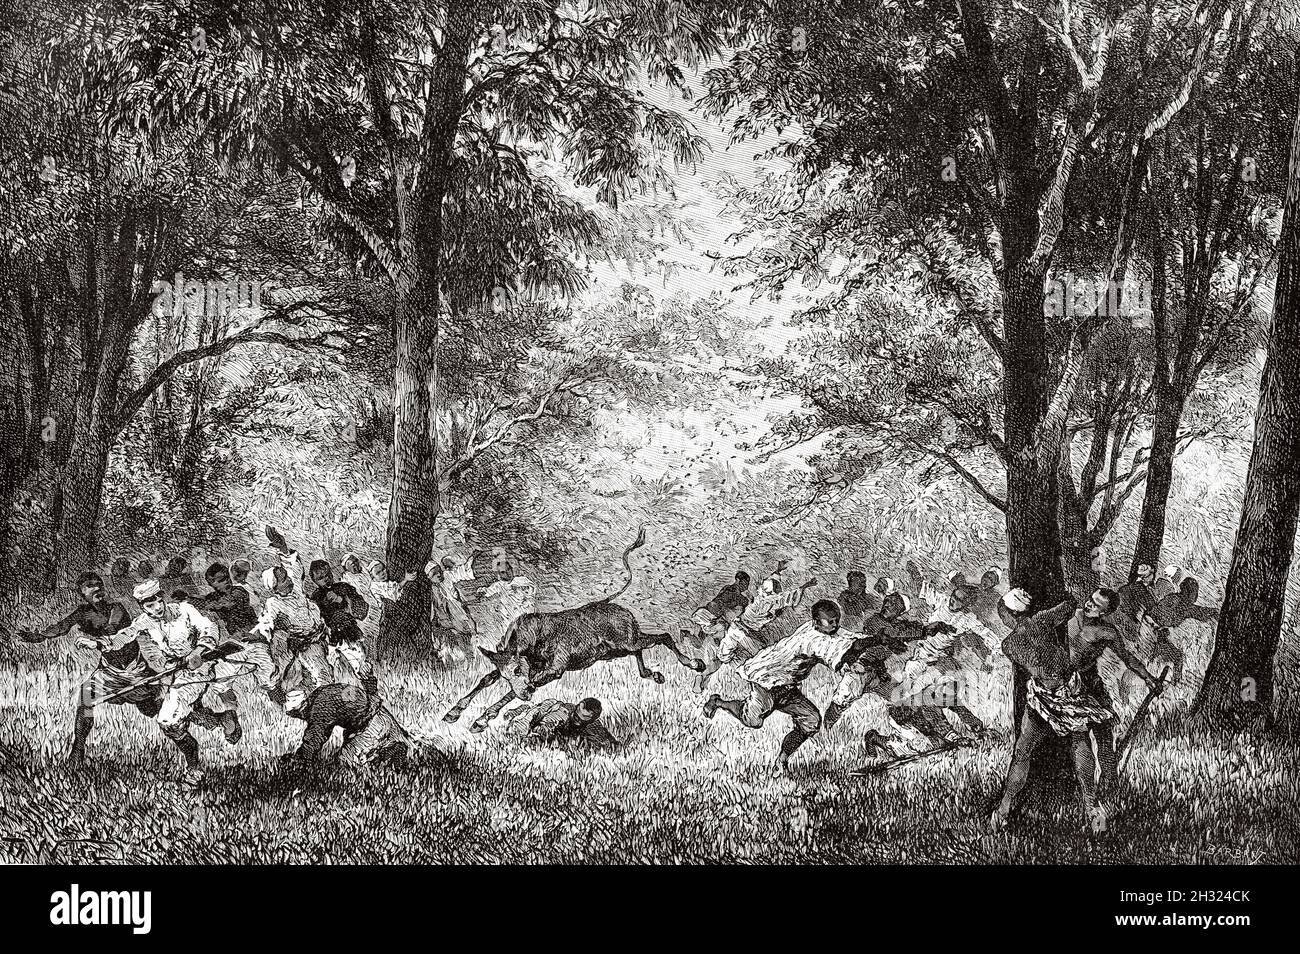 Bee attacks. Guinea-Bissau Africa. Old 19th century engraved illustration, Journey through Senegambia and Portuguese Guinea by captain Henri Brossard-Faidherbe (1855-1893) from Le Tour du Monde 1889 Stock Photo